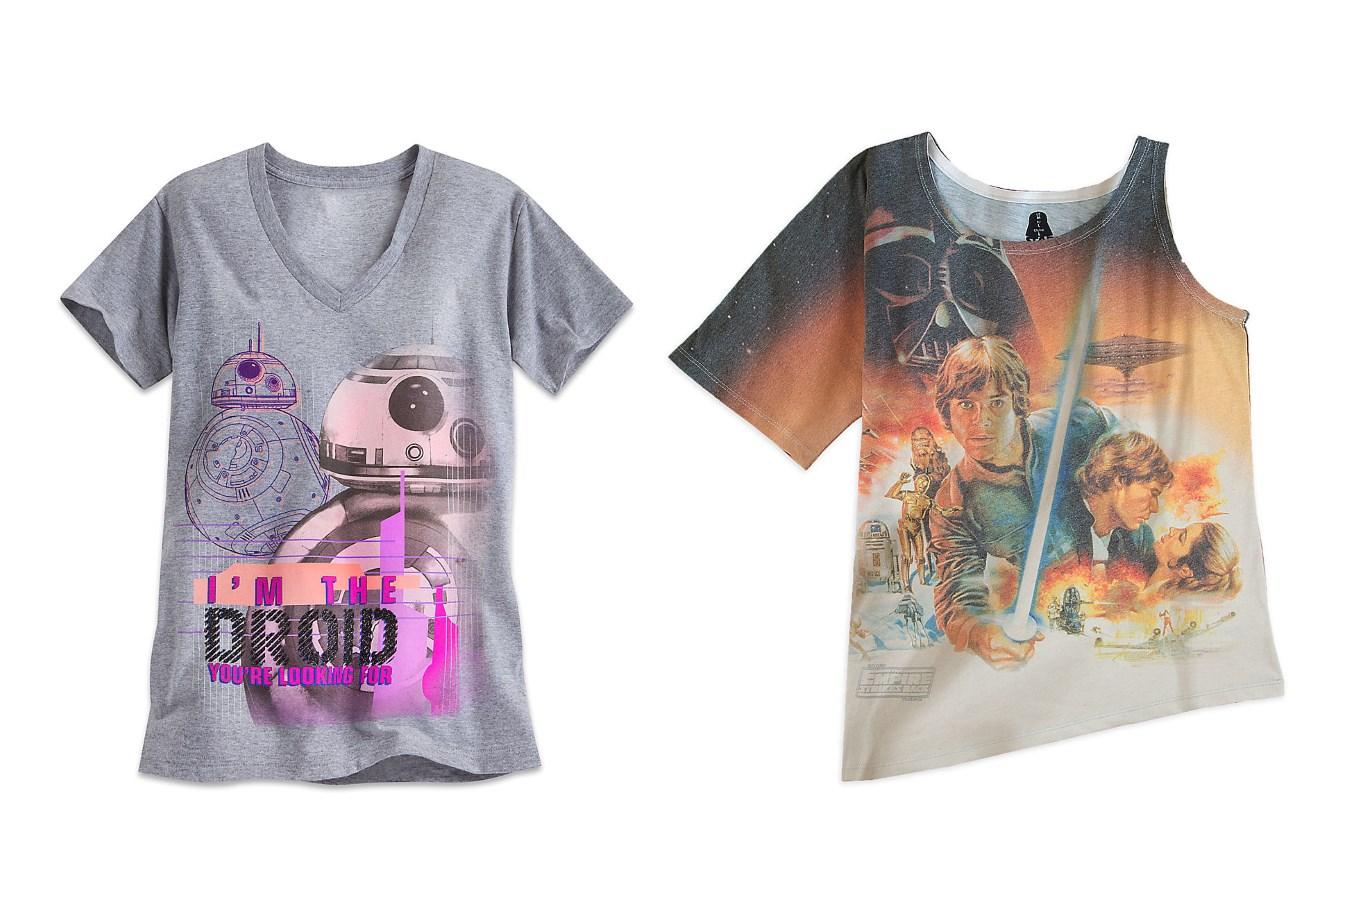 Disney Store - women's BB-8 and Empire Strikes Back tops